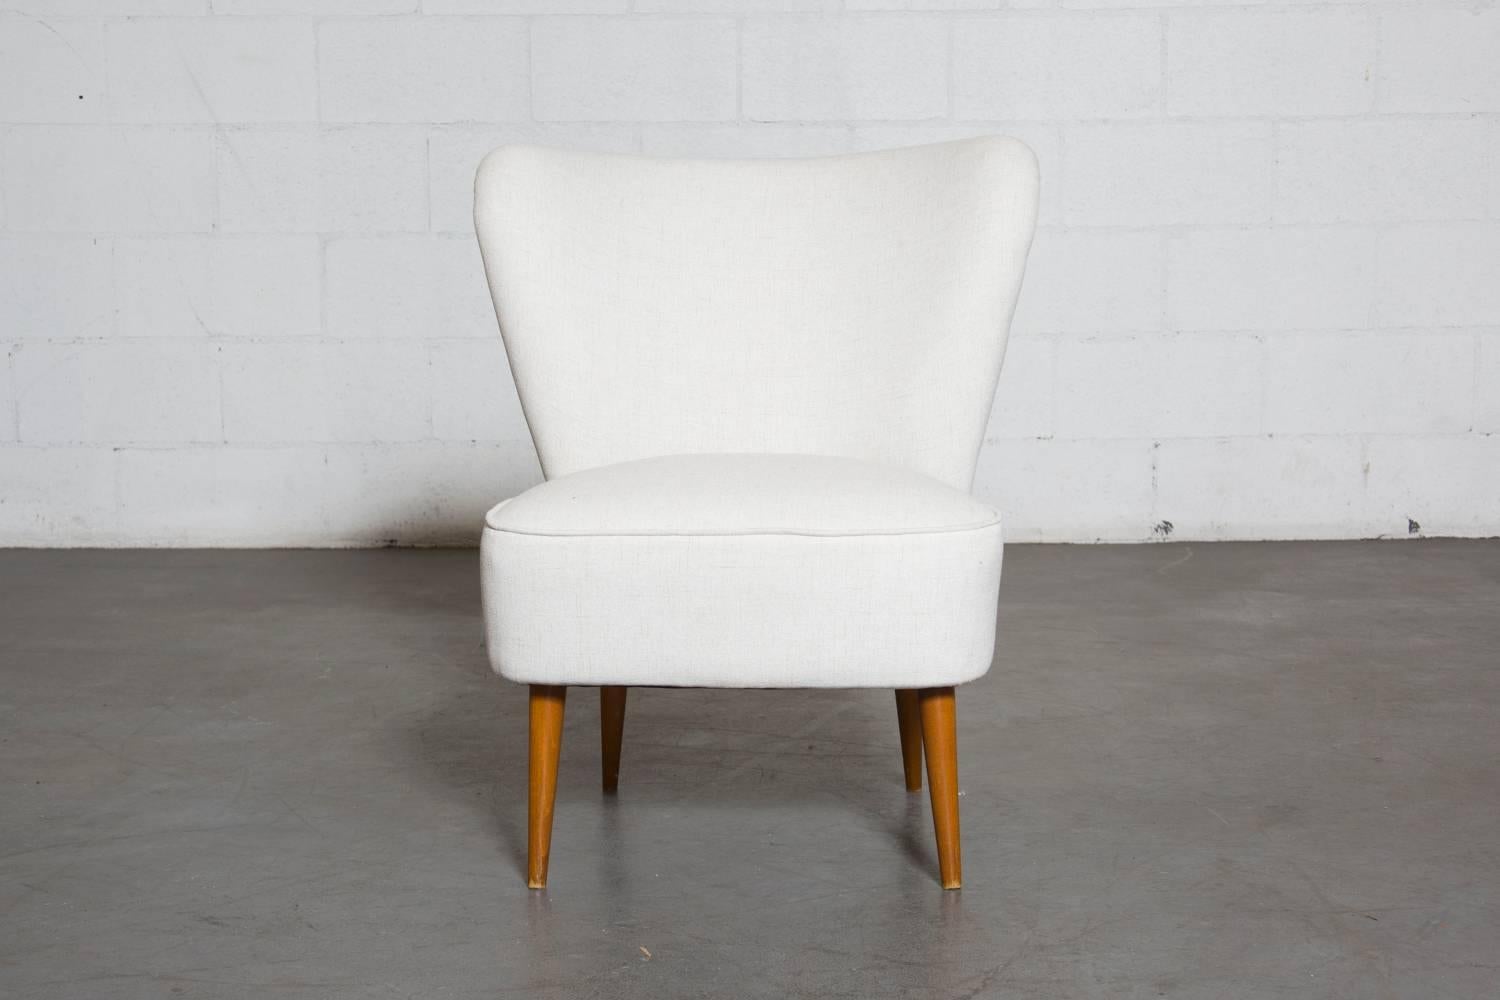 Theo Ruth Armless Boudoir Chair, Smaller in Stature. Newly Upholstered in White, Legs in Original Condition with Some Wear Consistent with Age and Use. 

Theo Ruth was an interior and furniture designer whose most famous design was his 1952 Congo